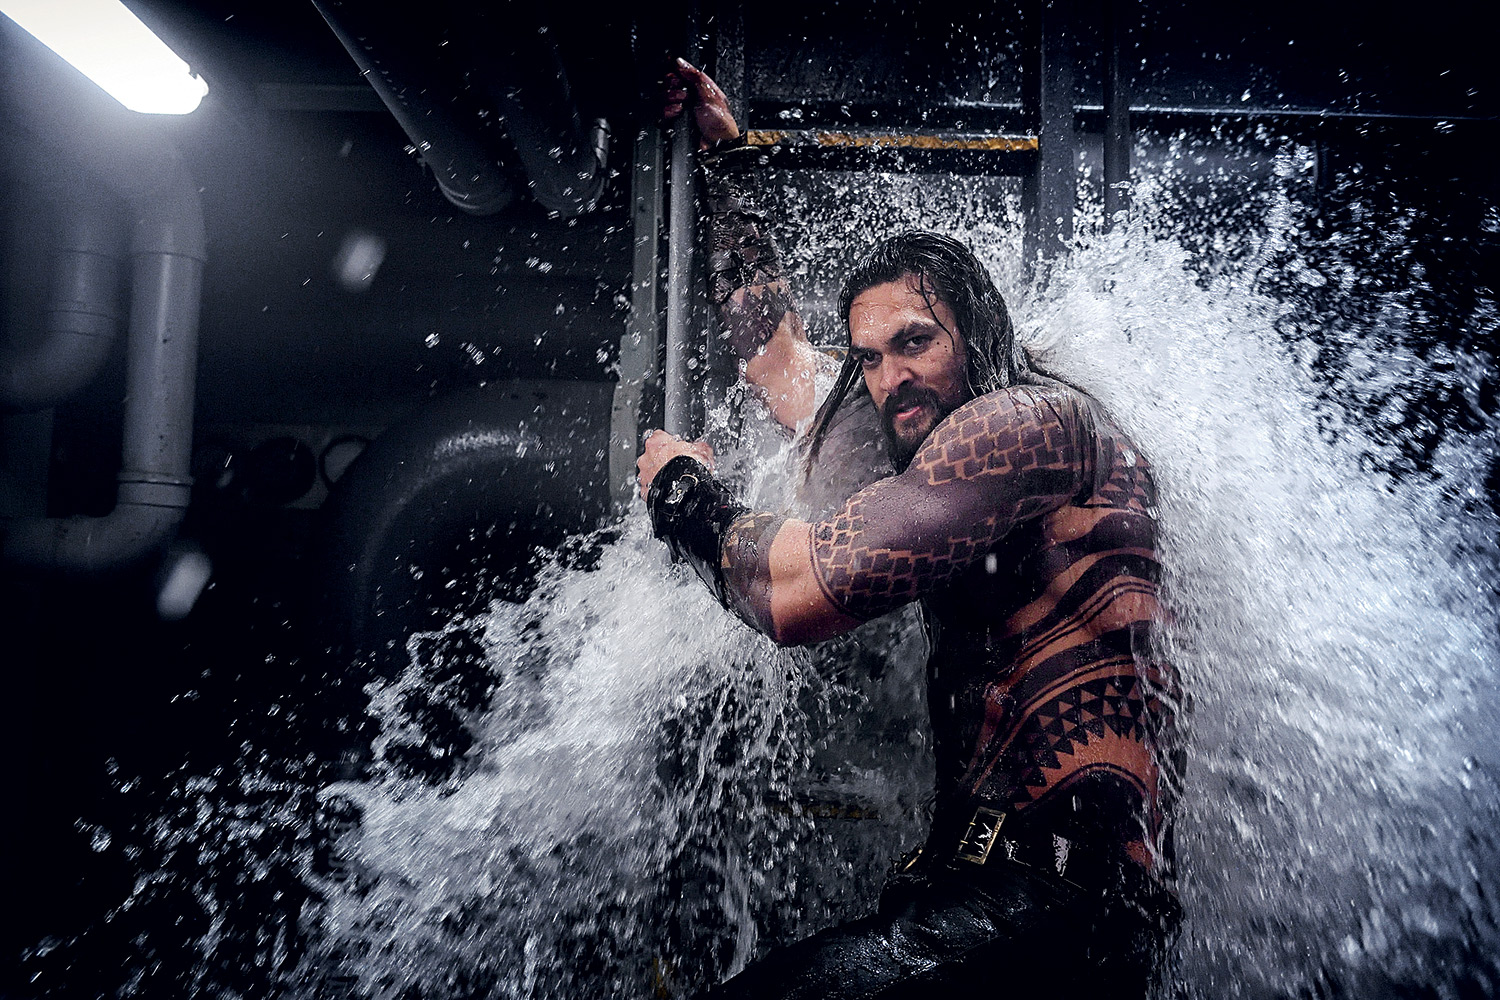 Fish out of water - Momoa as the hero: a prince raised on land and reluctant to accept his undersea kingdom